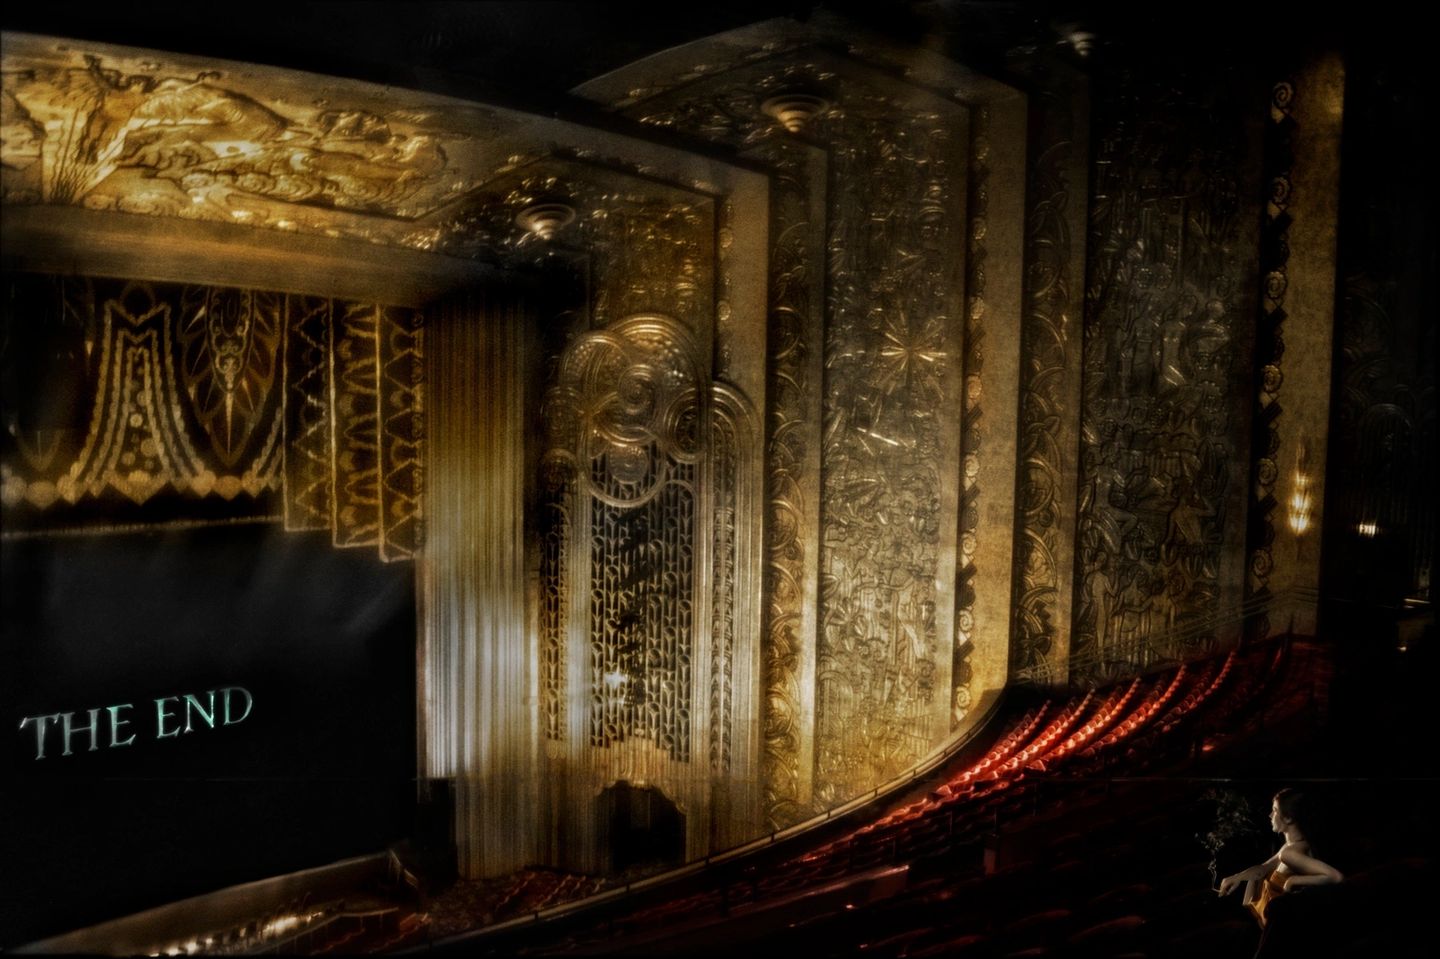 A theater with gold and black walls